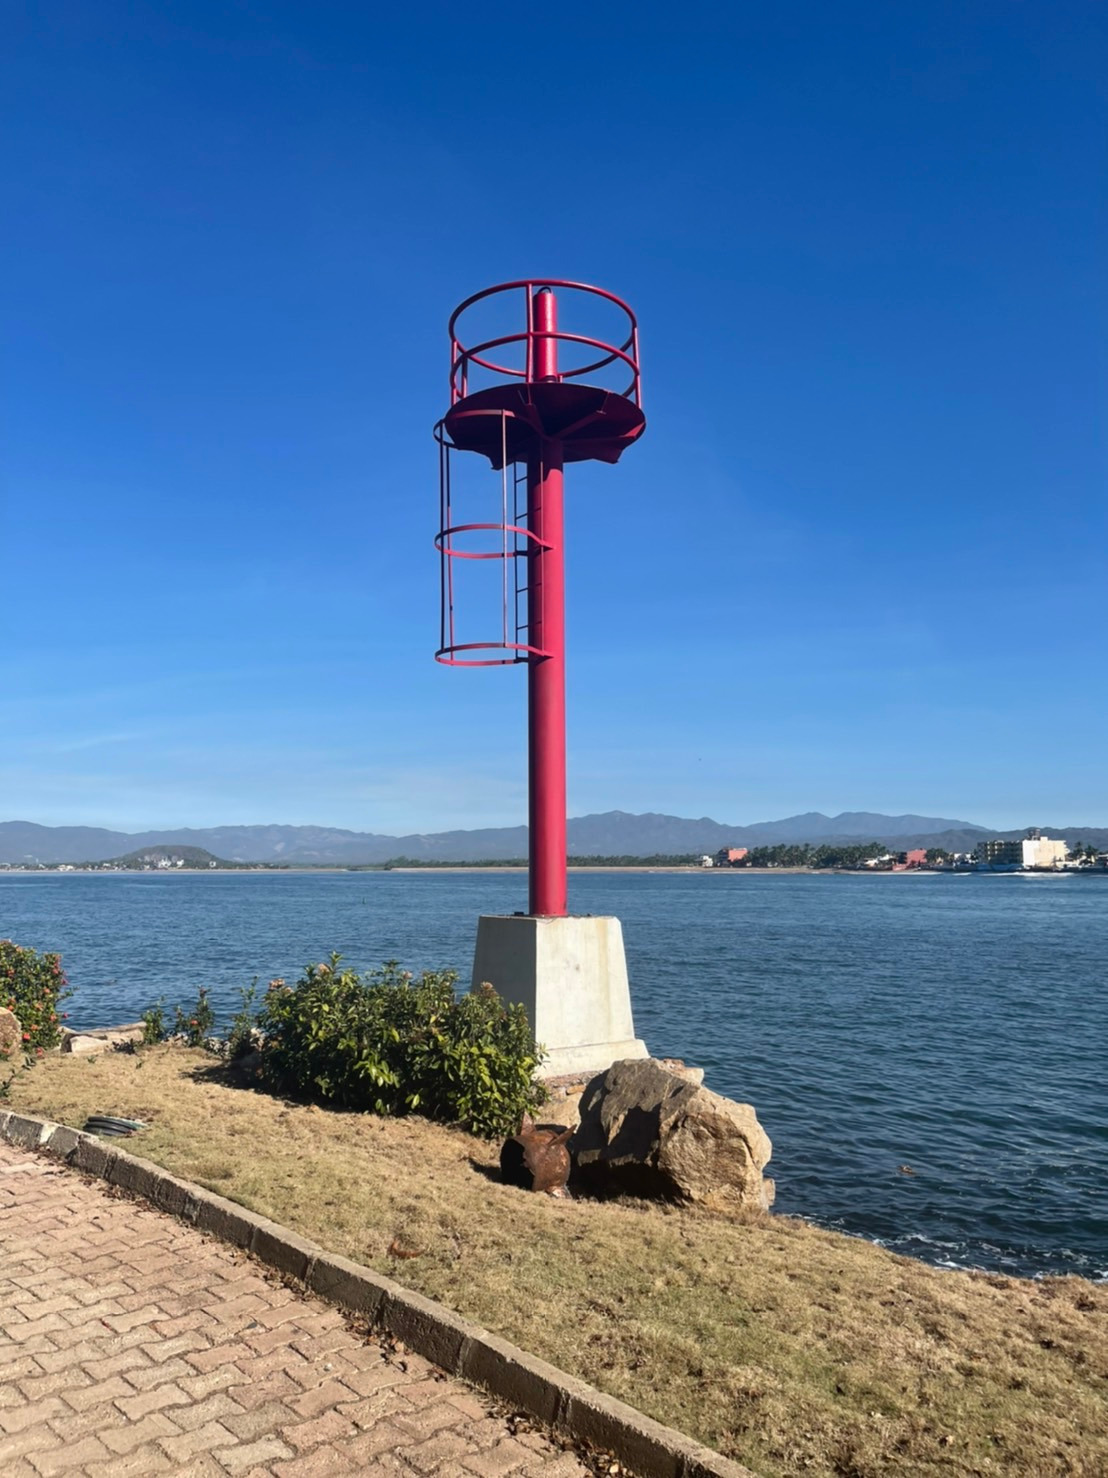 Looks like the red entrance light into Barra harbor maybe back in action.